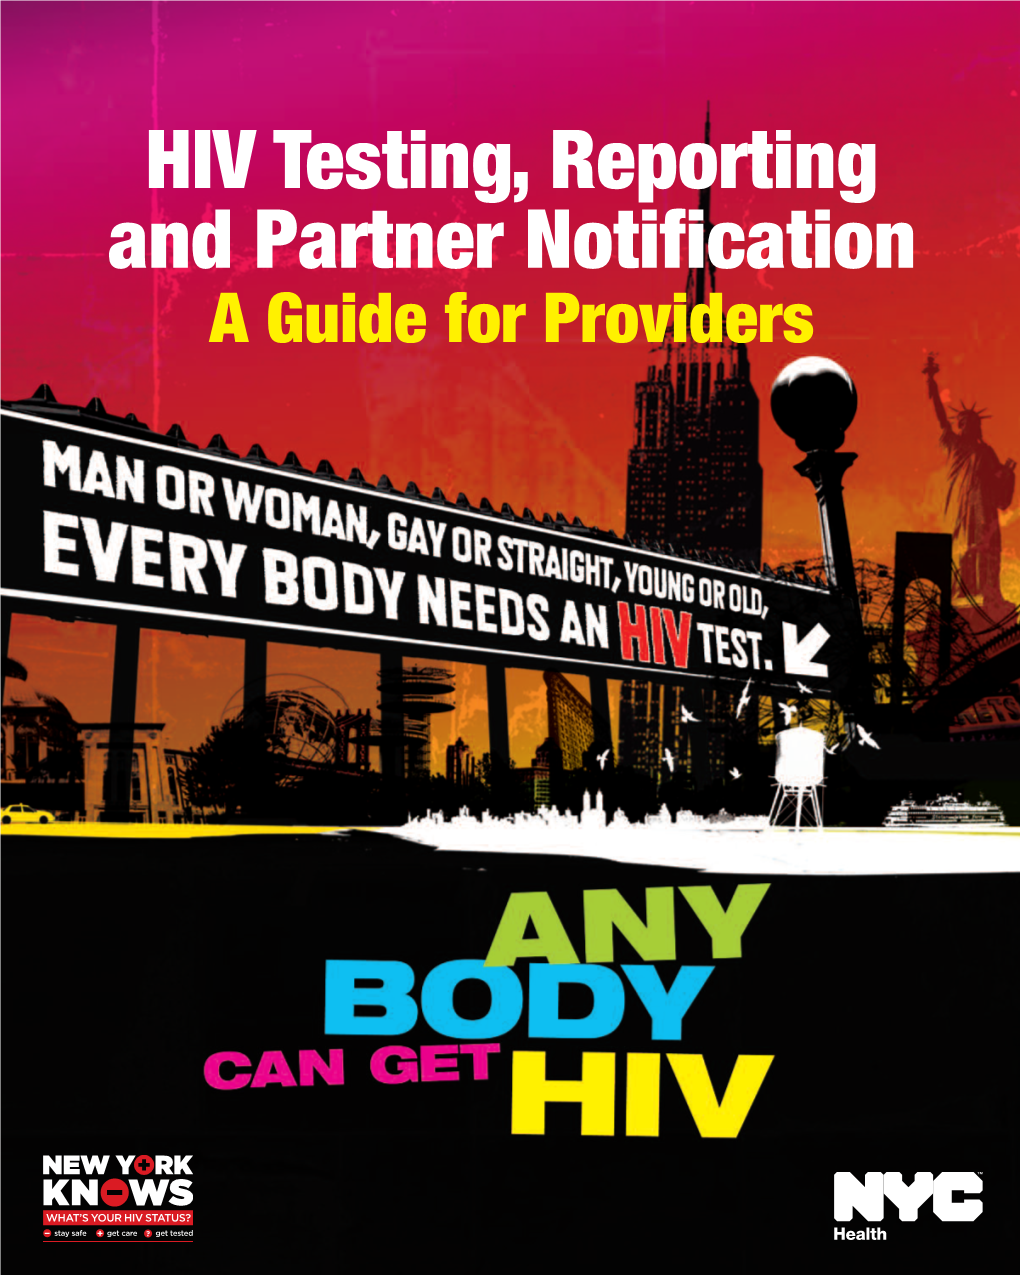 A Guide for Providers: HIV Testing, Reporting and Partner Notification